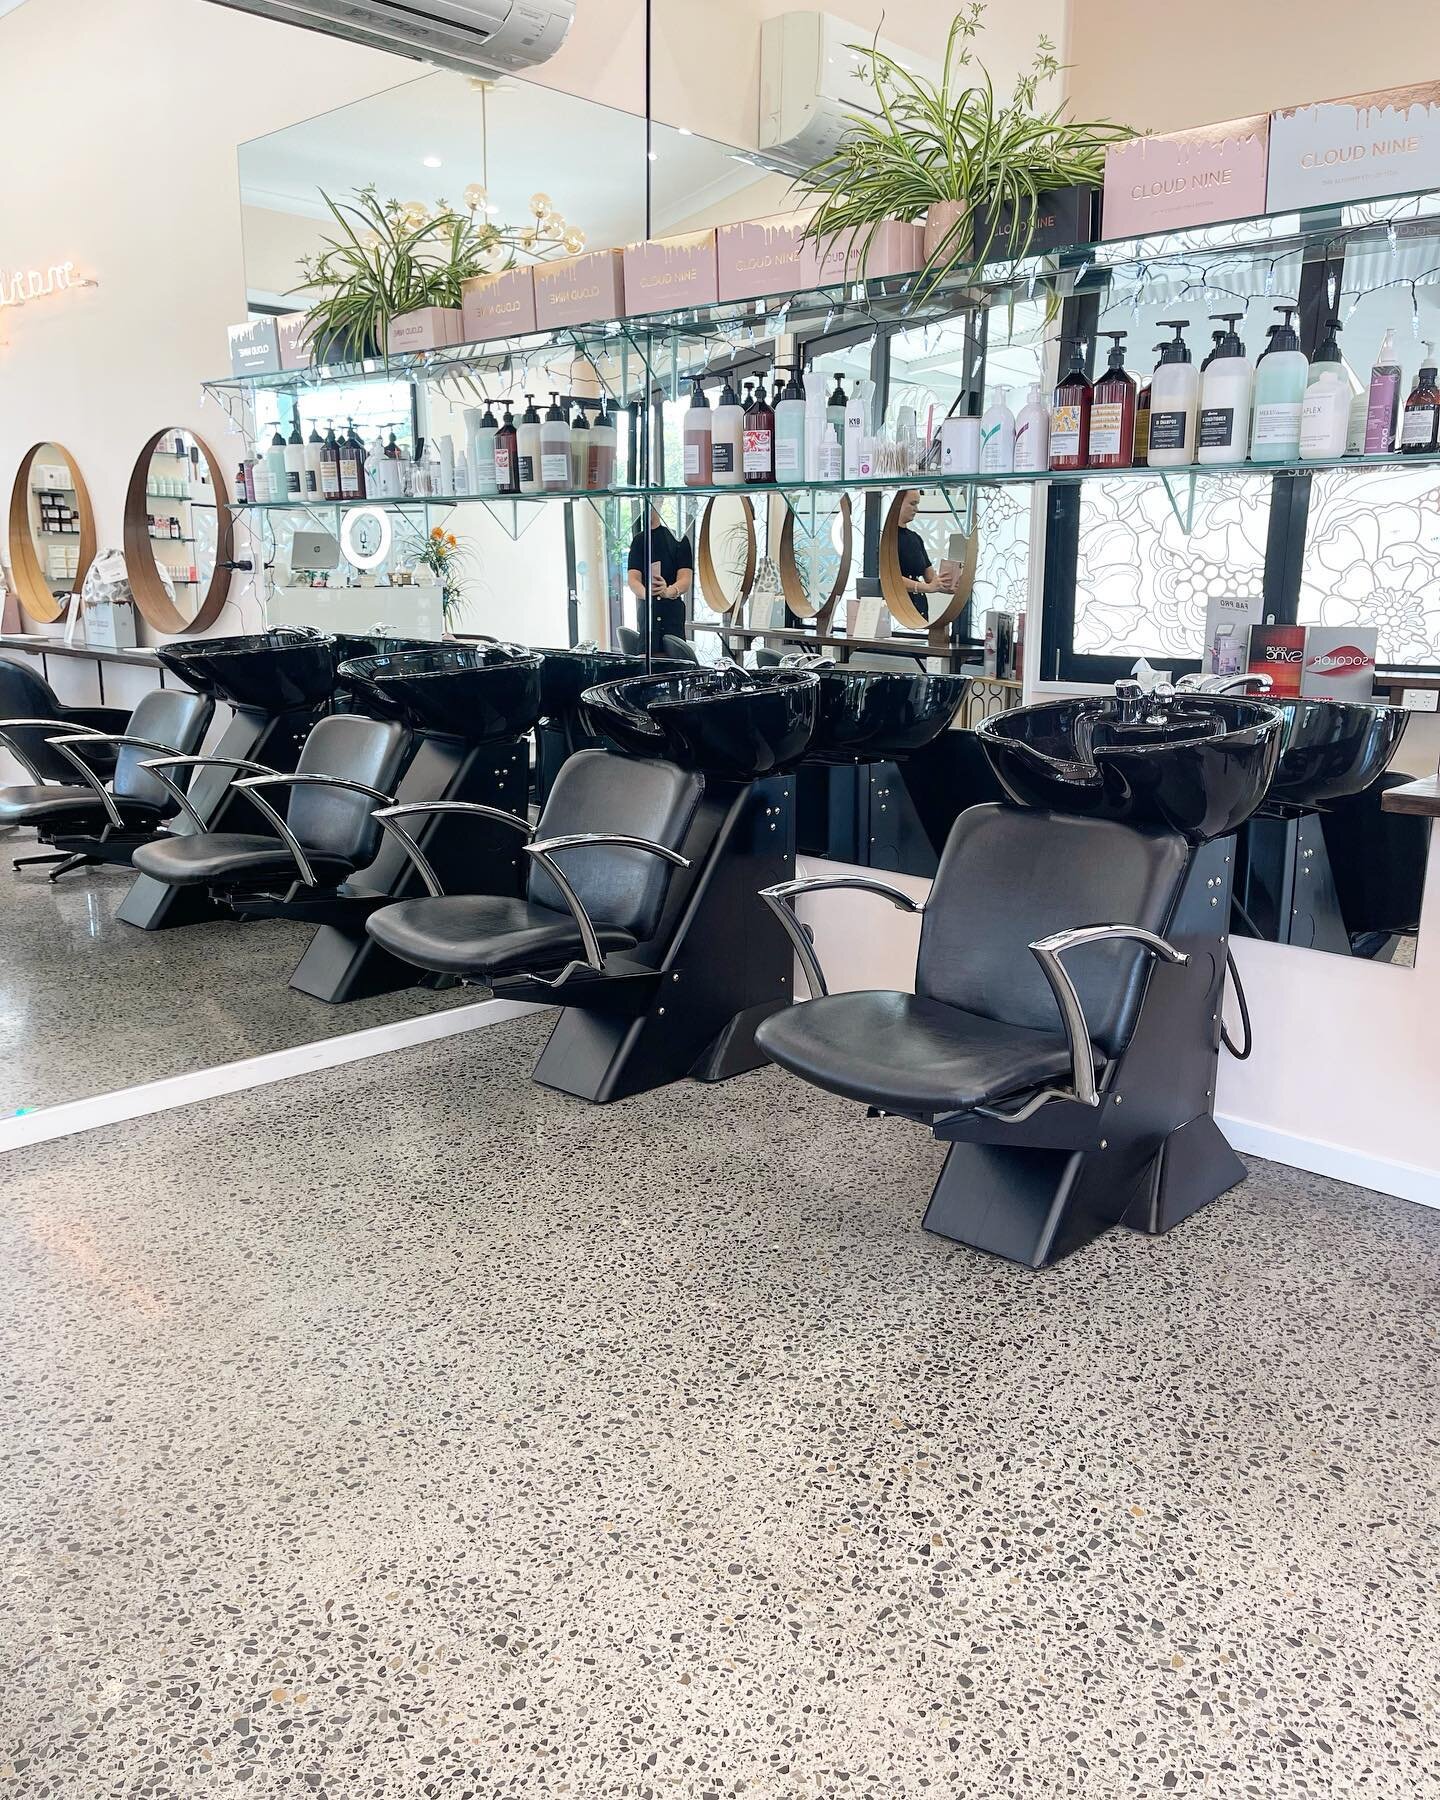 Where the magic happens 💆🏼&zwj;♀️ All of our treatments come with a 10/10 head massage which is rumoured to trump a full body massage 🥰
.
.
.
.
#beachblonde #mirrorwall #fern #polishedconcrete #hairsalon